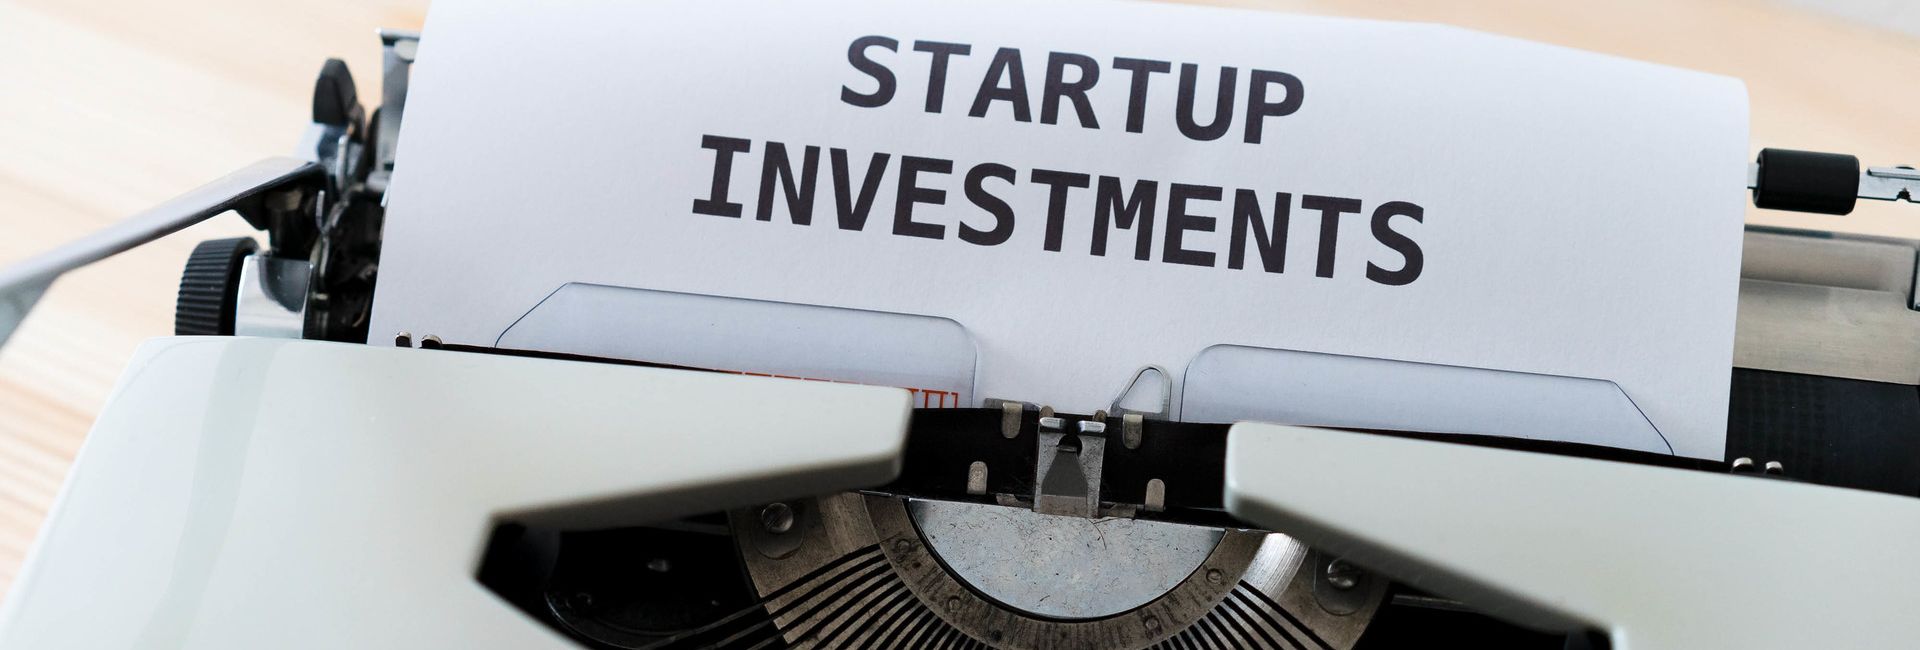 Startup Investments